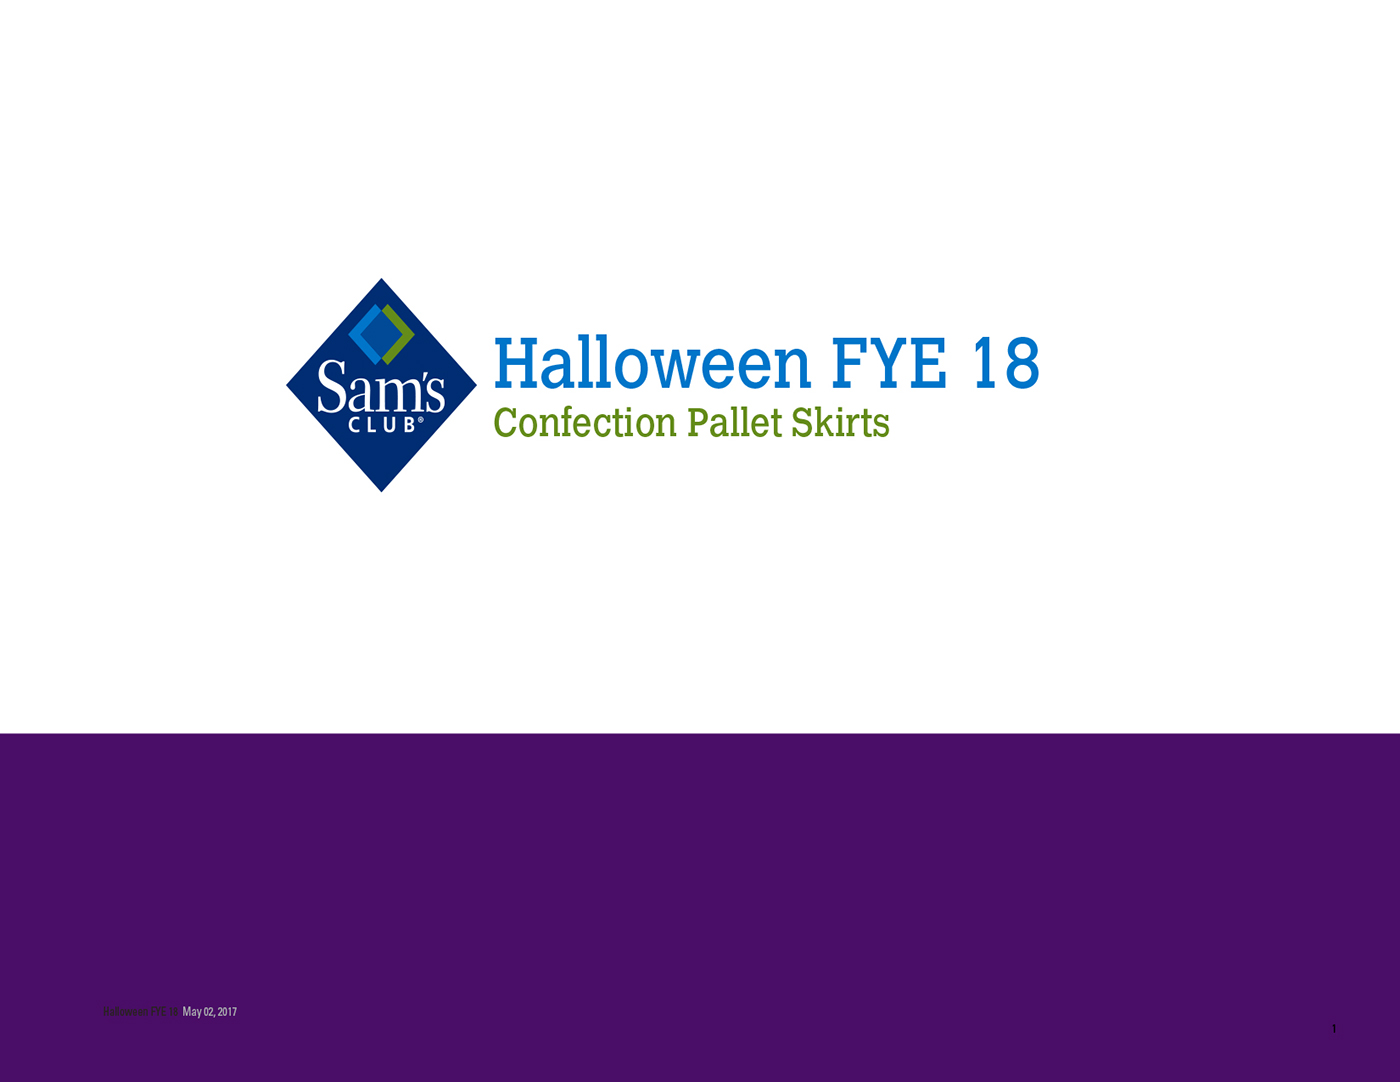 ILLUSTRATION  Halloween Candy hershey mars M&M's styleguide Style Guide brand guide brandguide